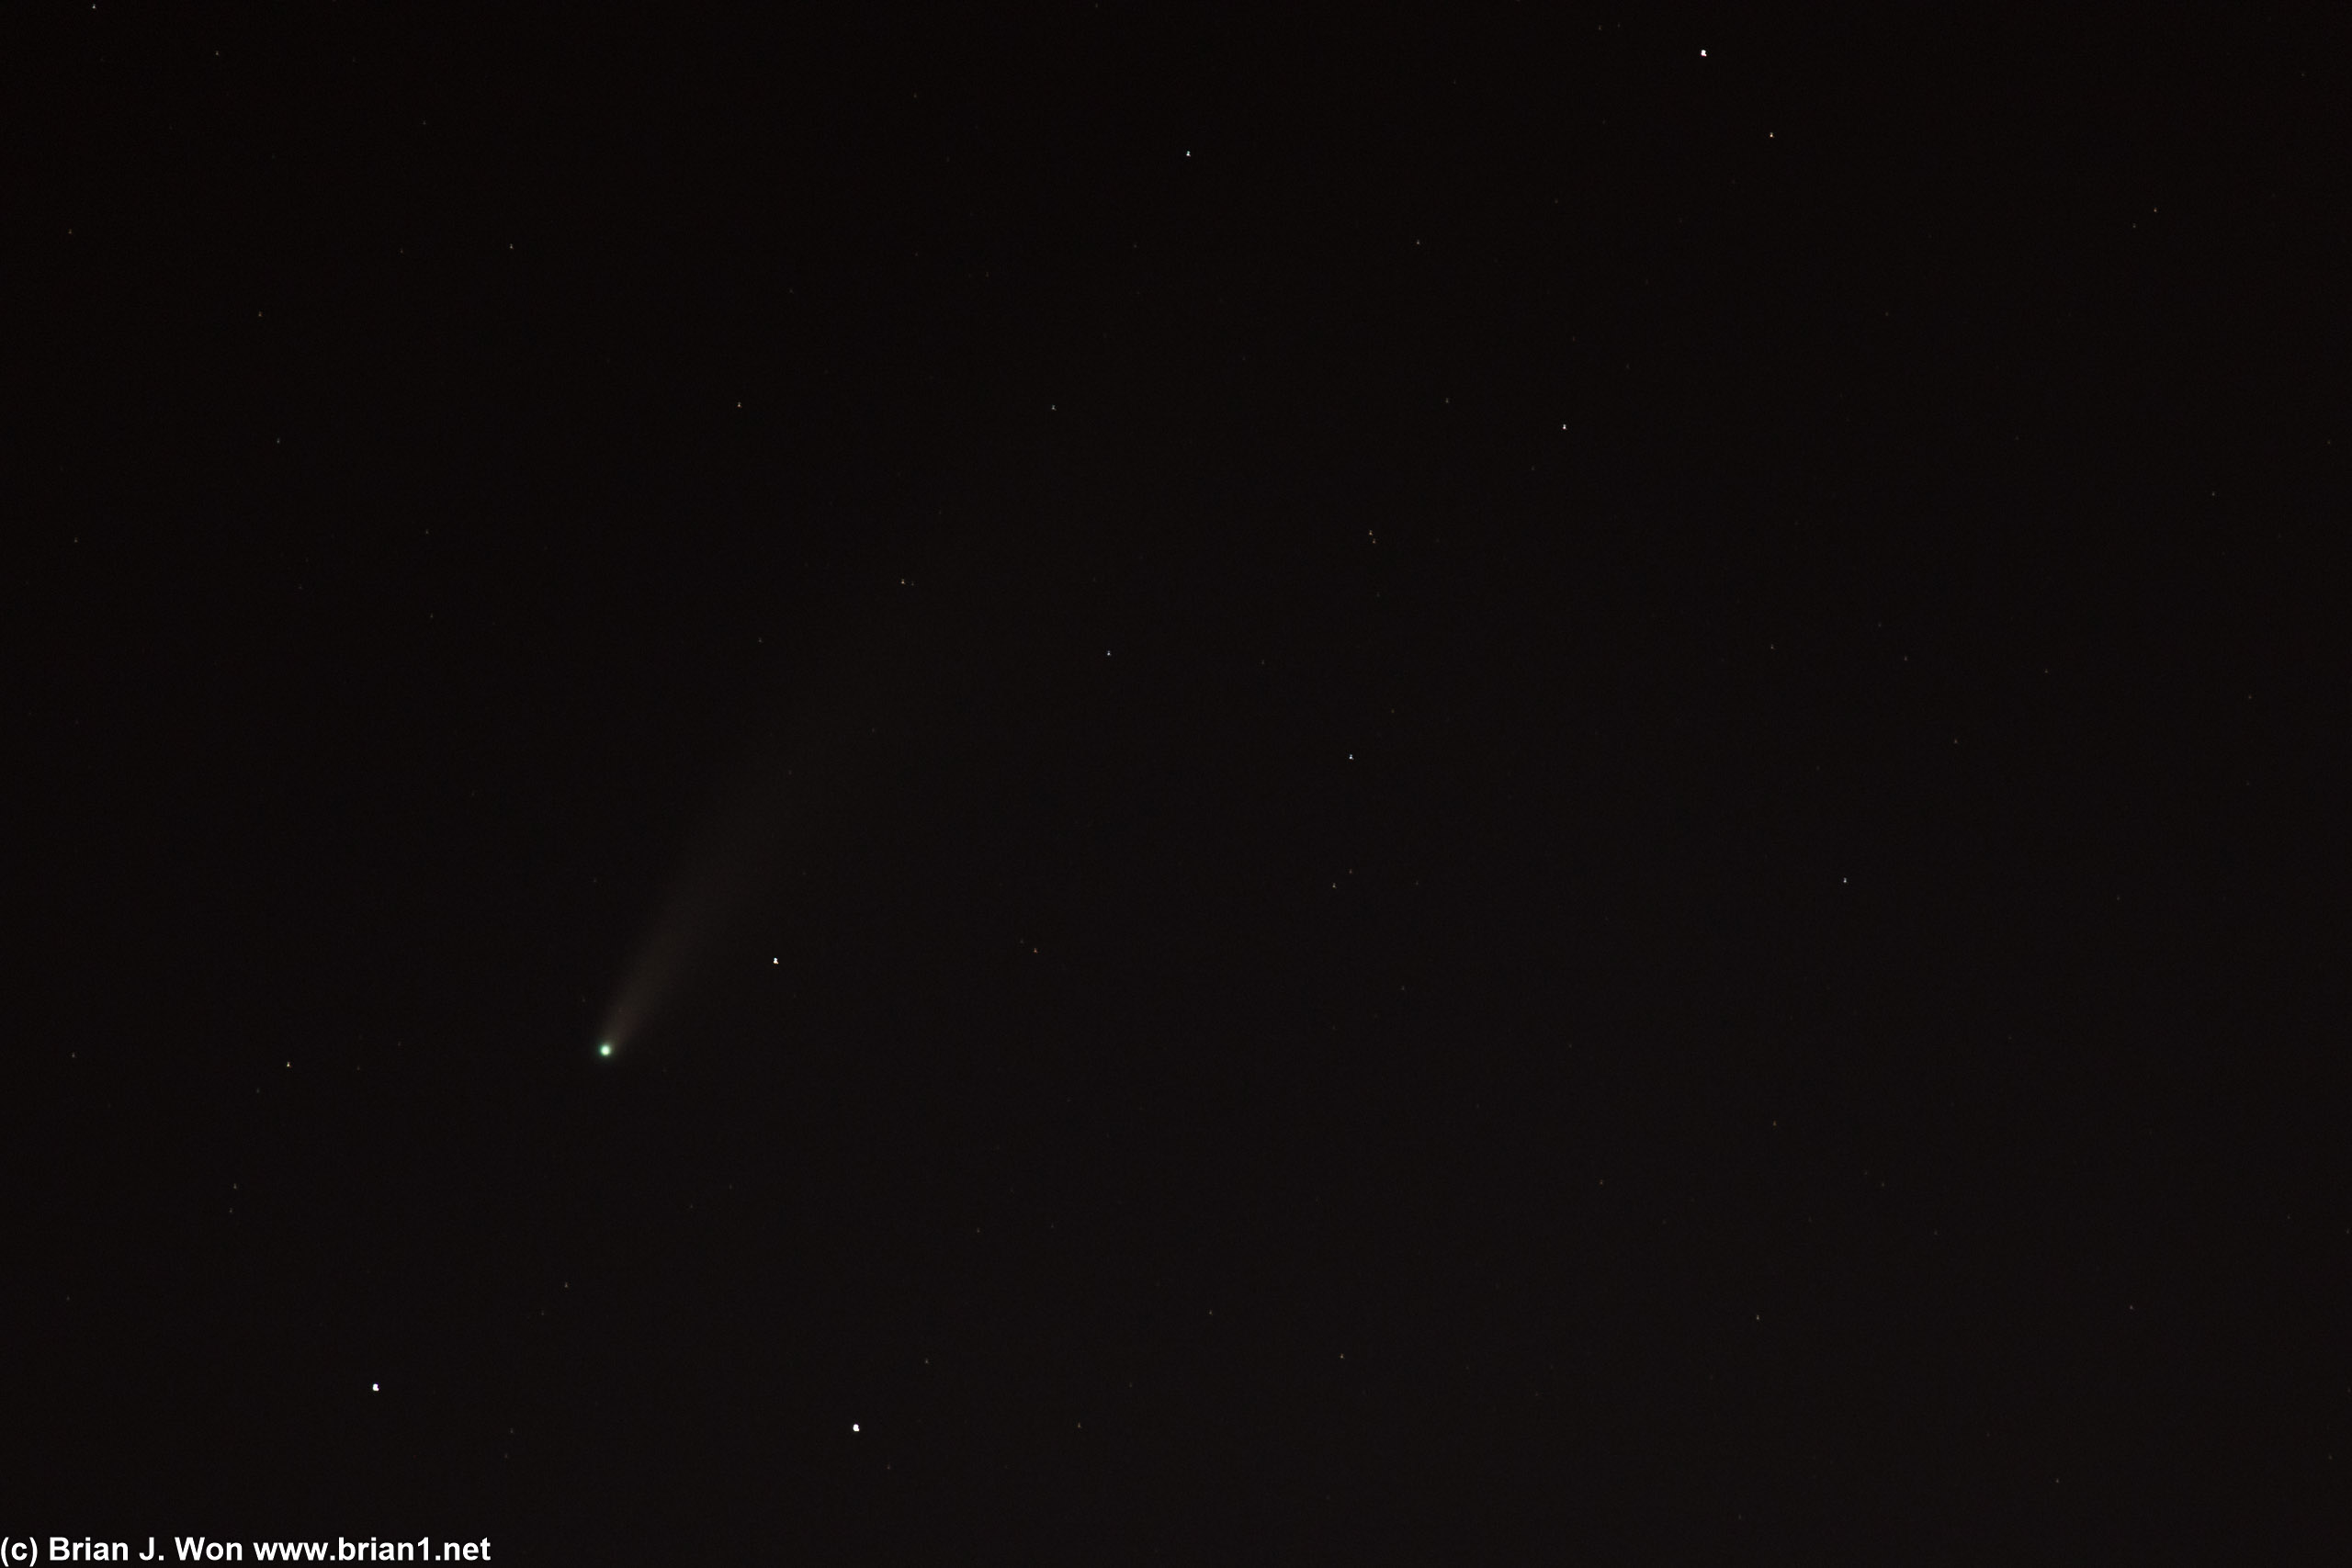 Comet NEOWISE from one of Mulholland Drive's many scenic overlooks.